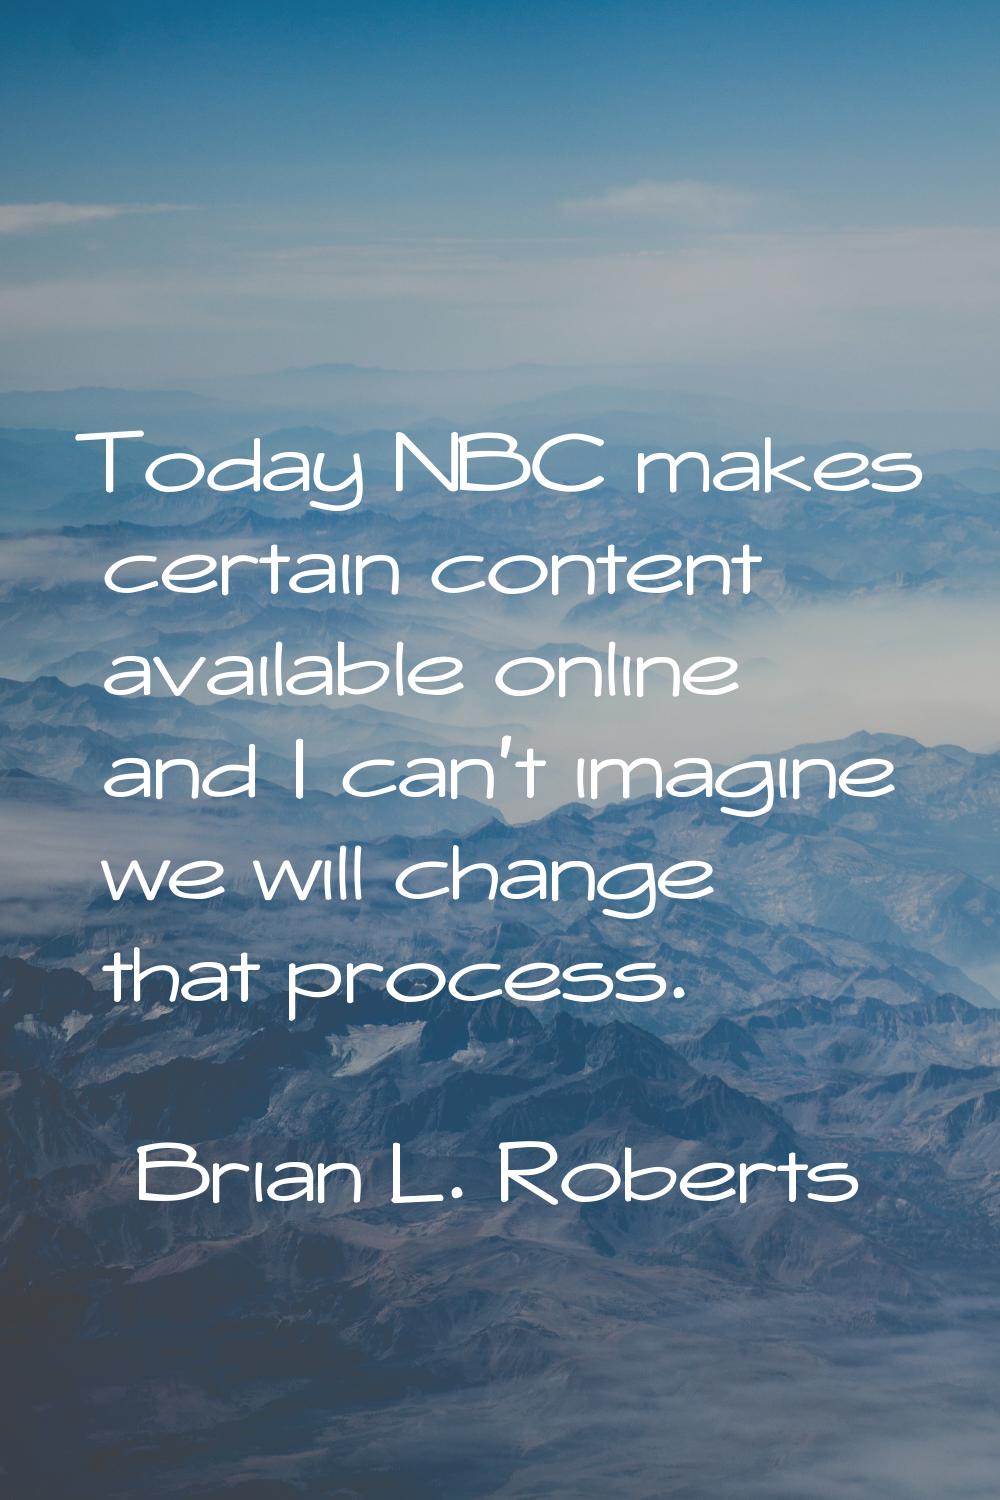 Today NBC makes certain content available online and I can't imagine we will change that process.